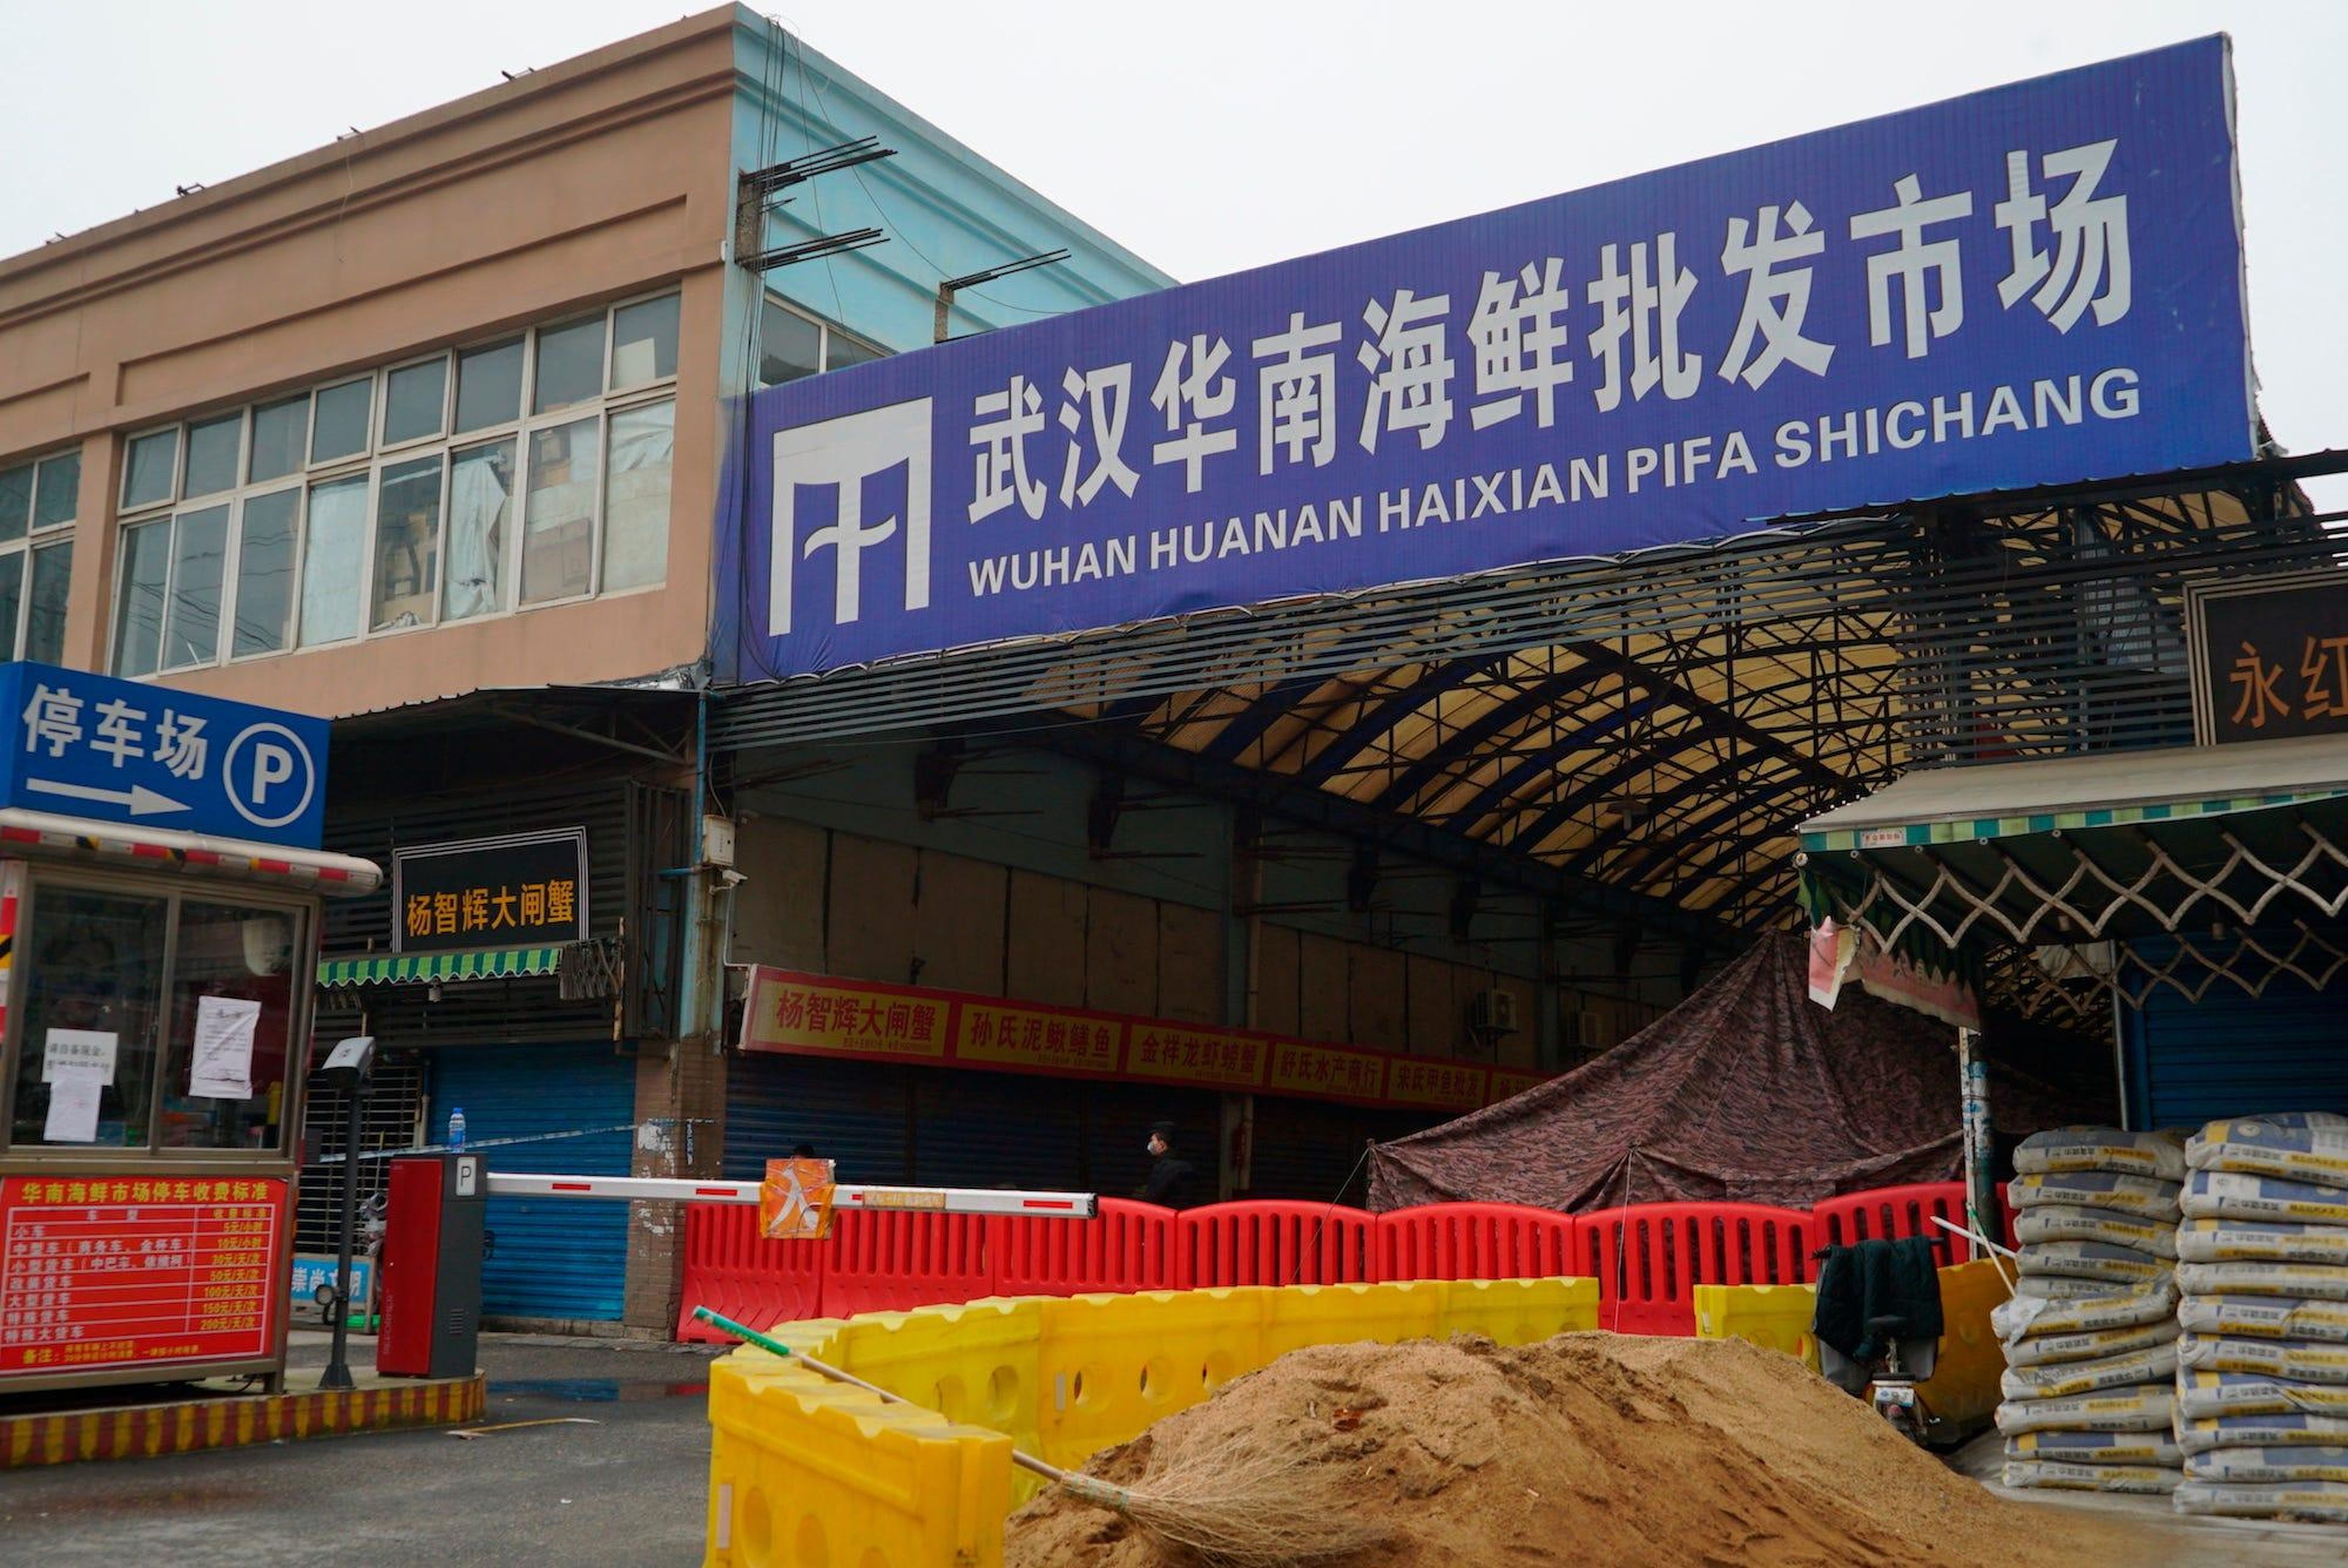 A photo of the Wuhan Seafood Wholesale market, January 21, 2020.